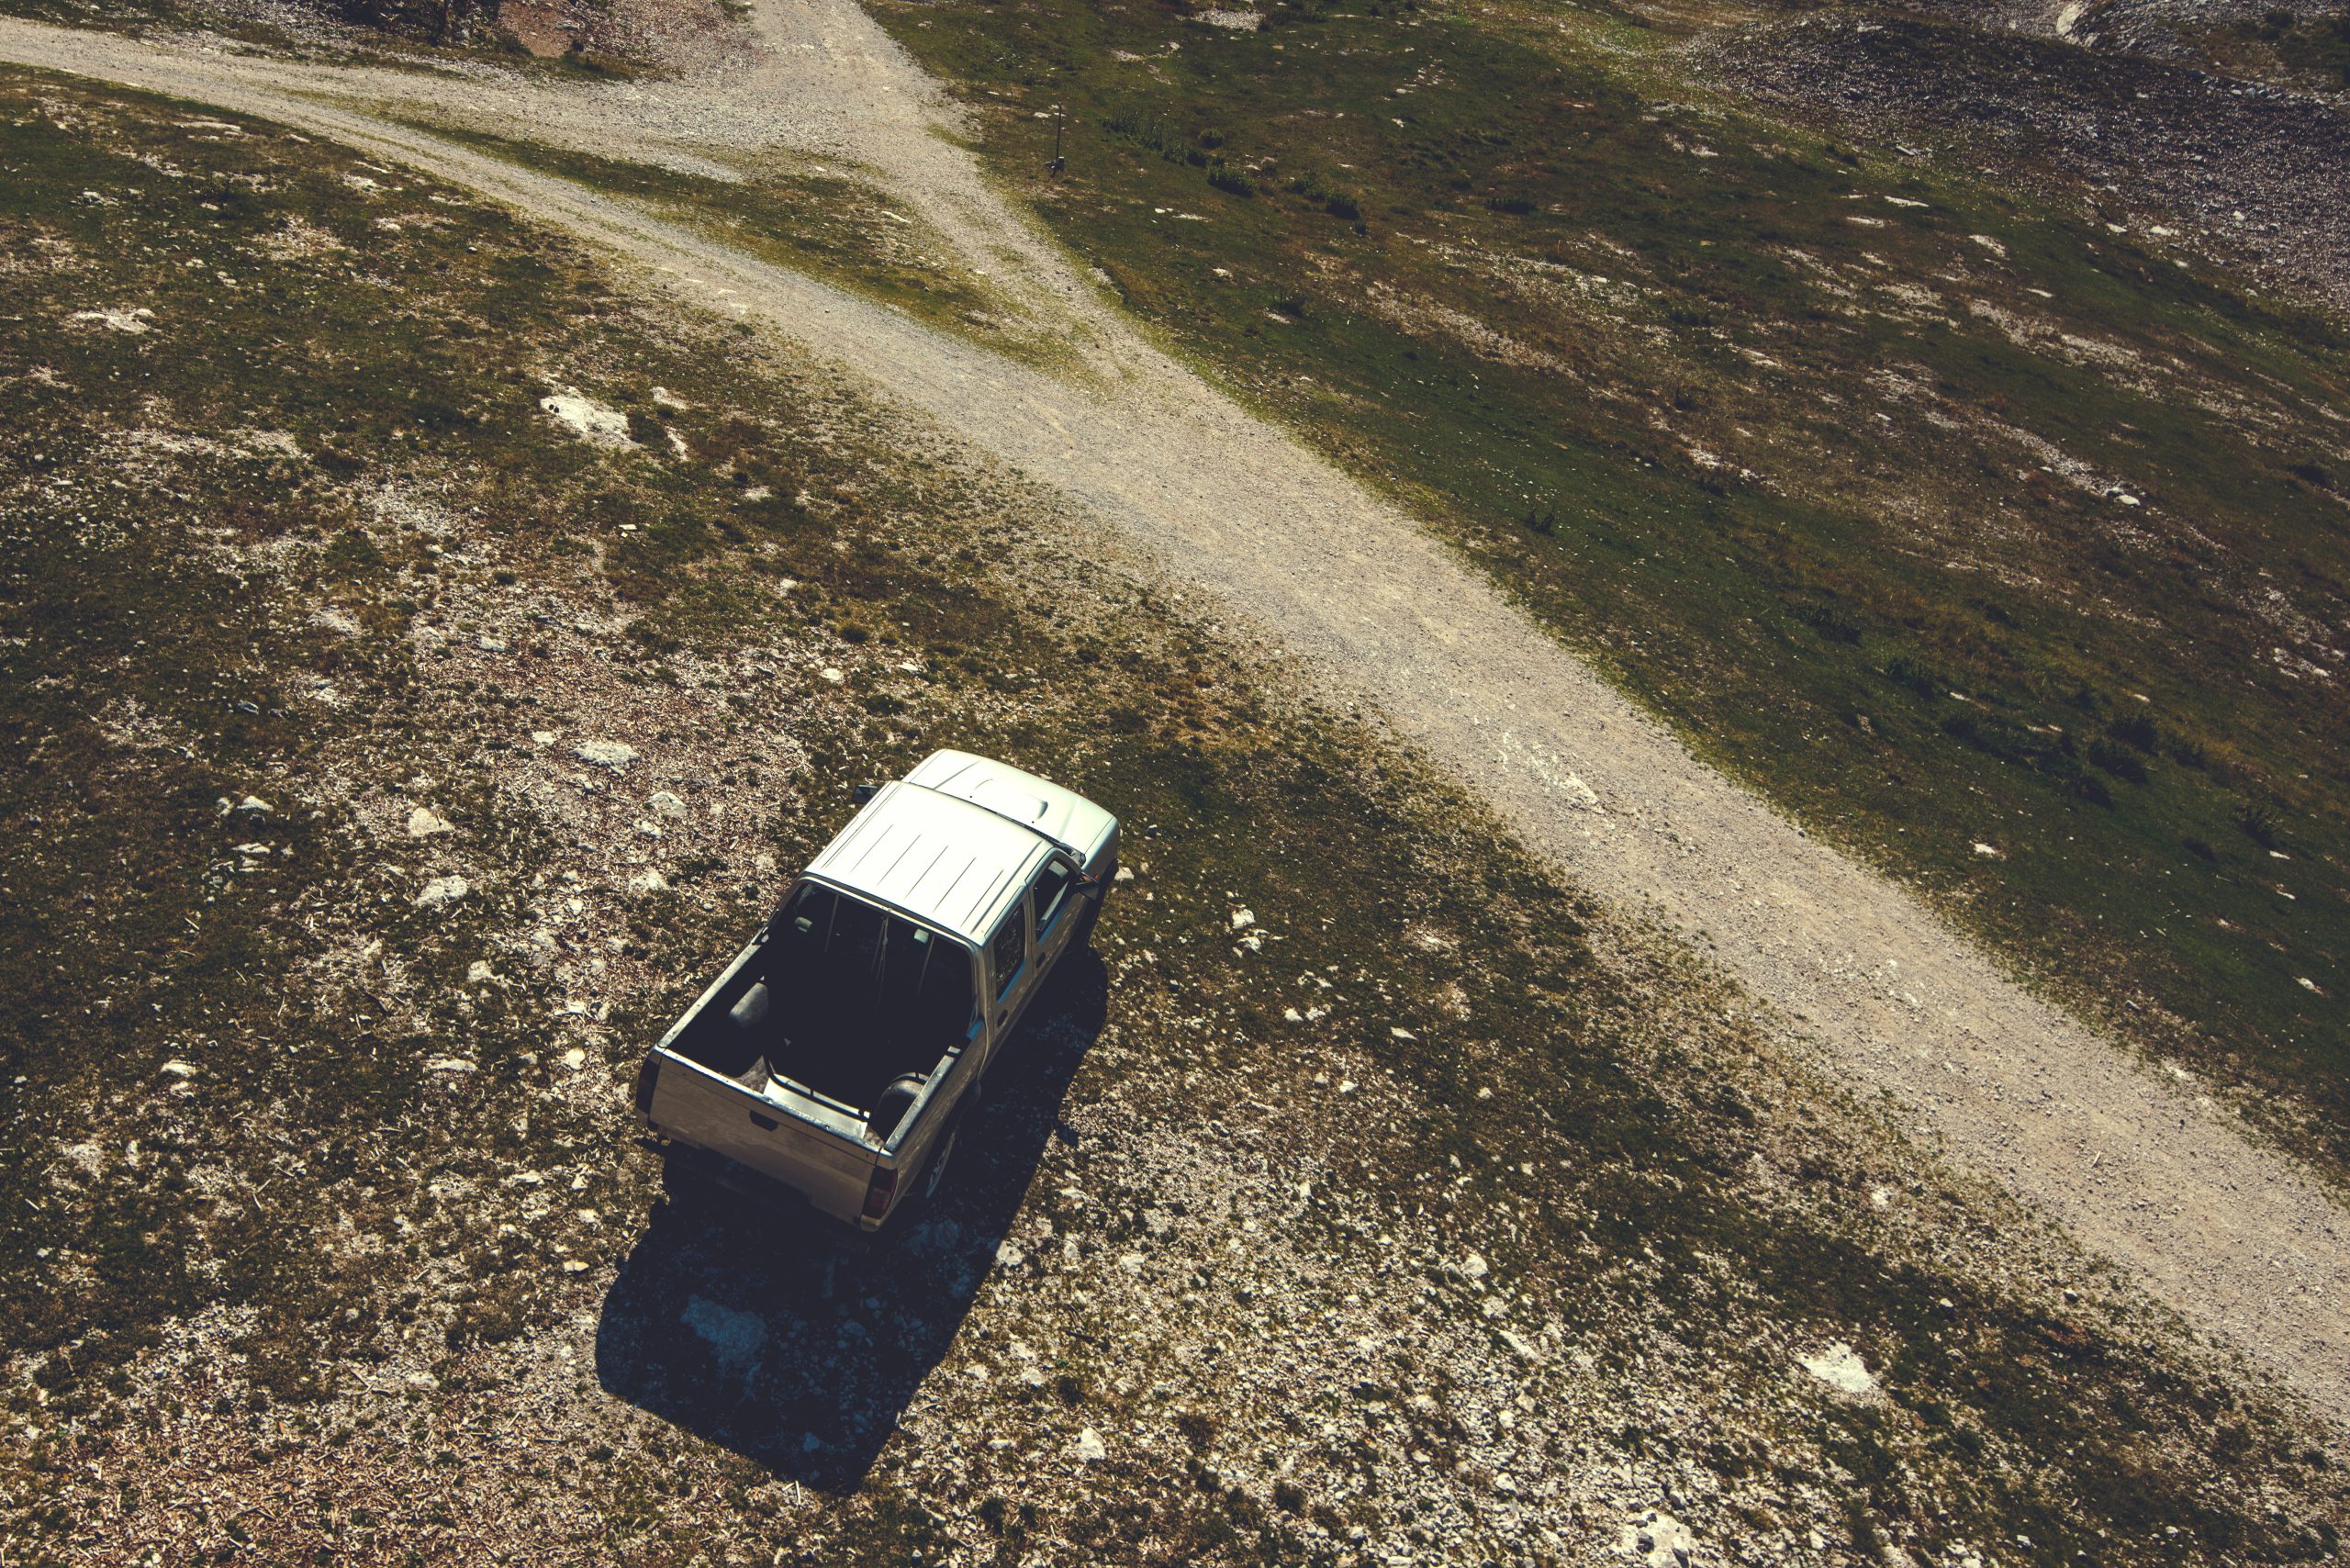 Pick up truck on mountain road, aerial view of the vehicle